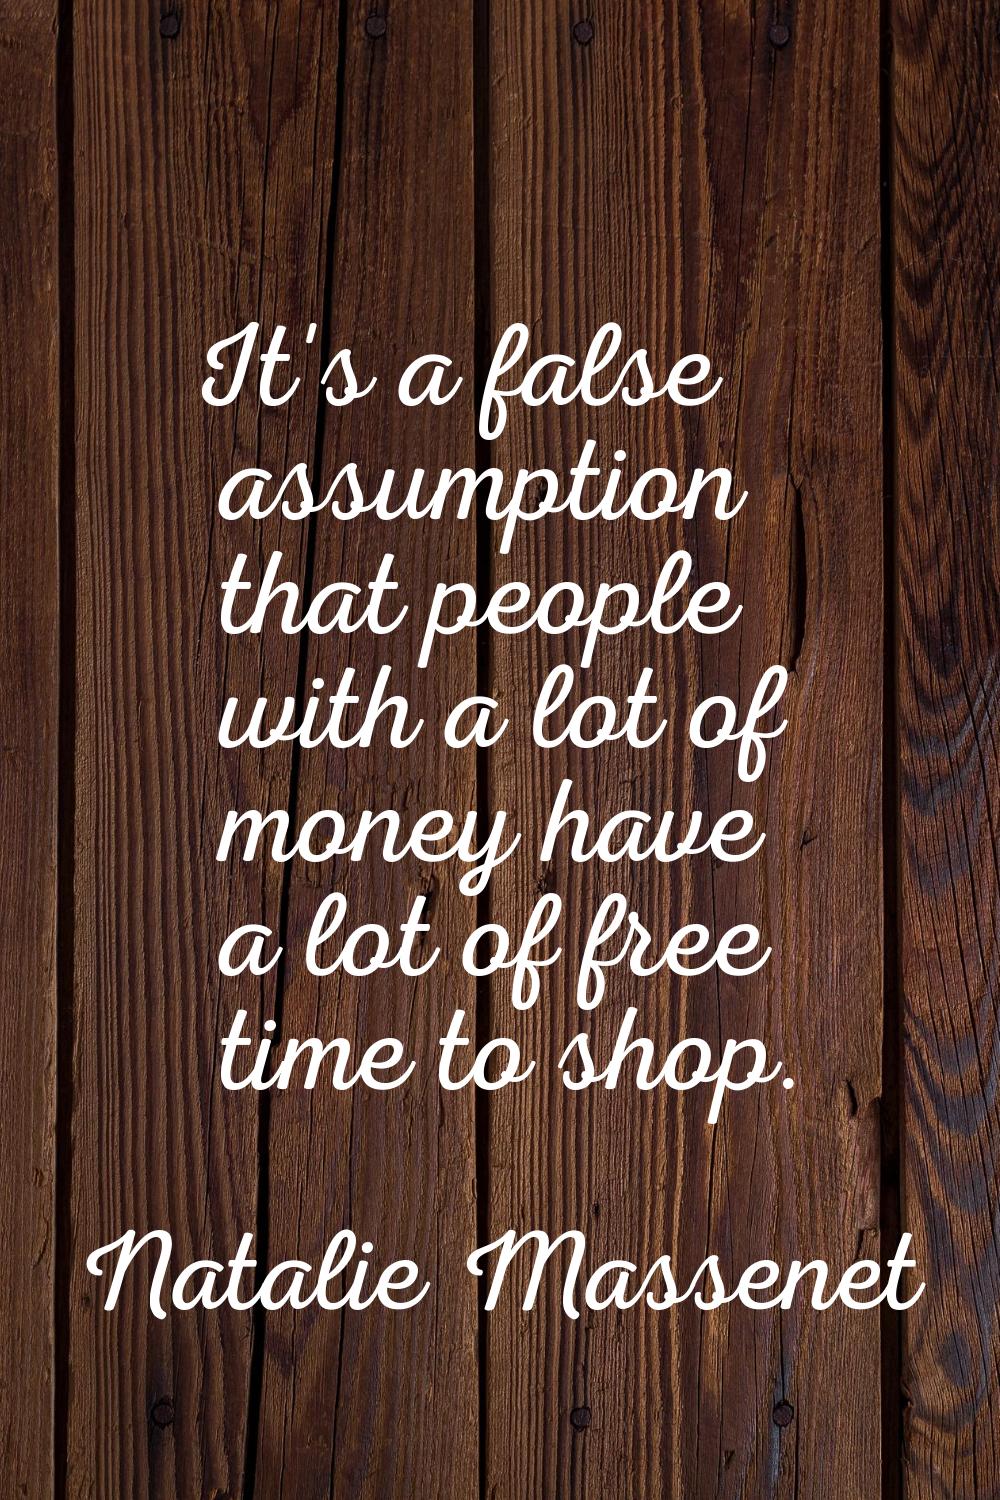 It's a false assumption that people with a lot of money have a lot of free time to shop.